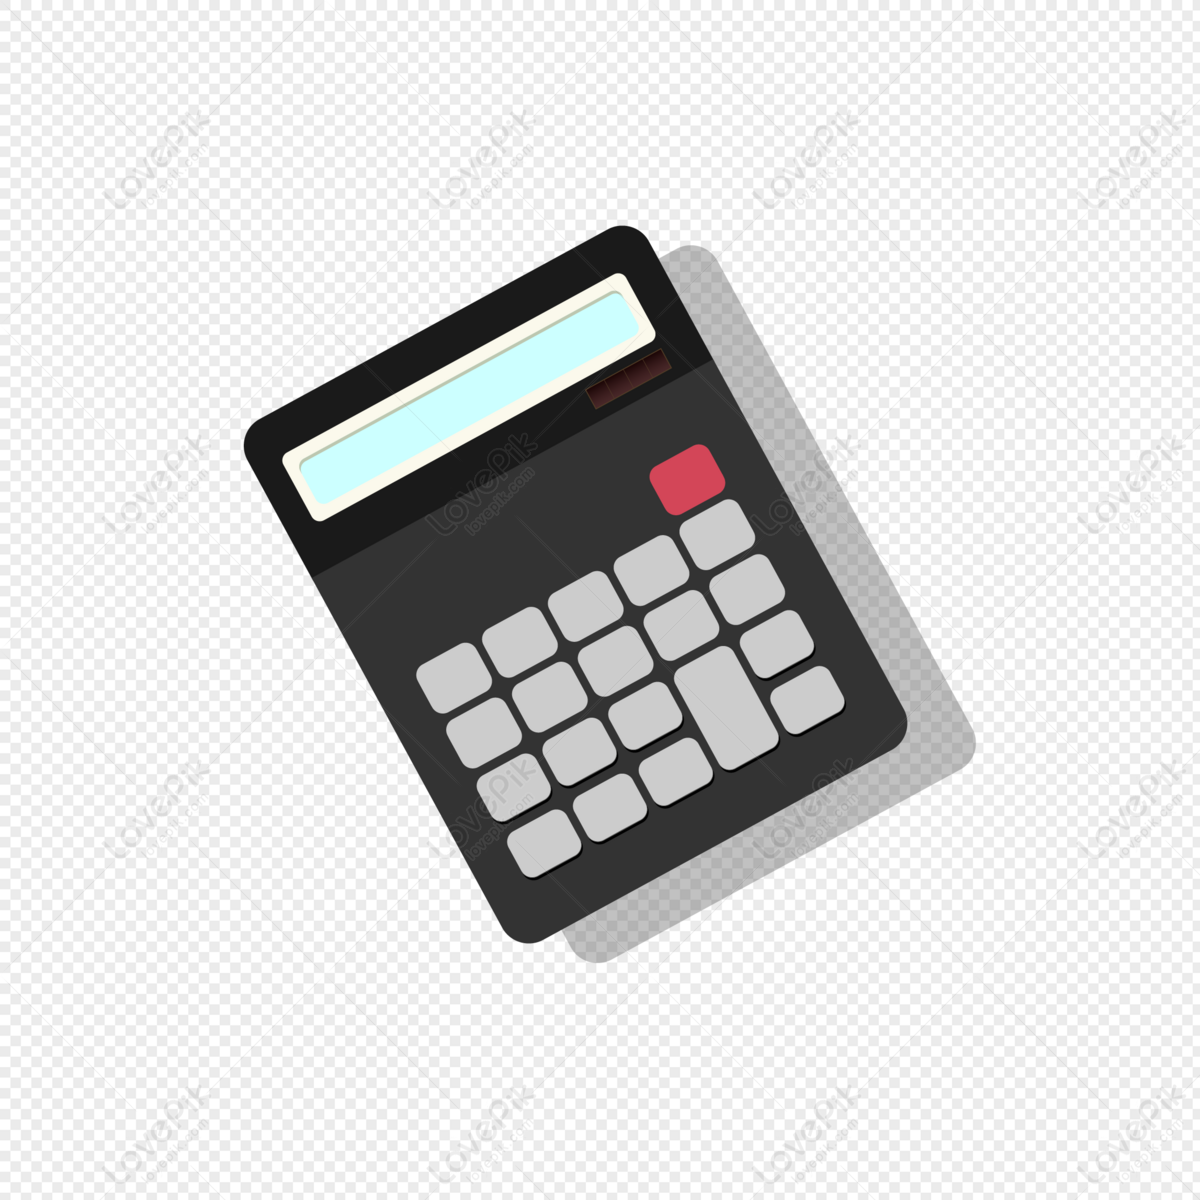 Calculator PNG Transparent Background And Clipart Image For Free Download -  Lovepik | 400516530